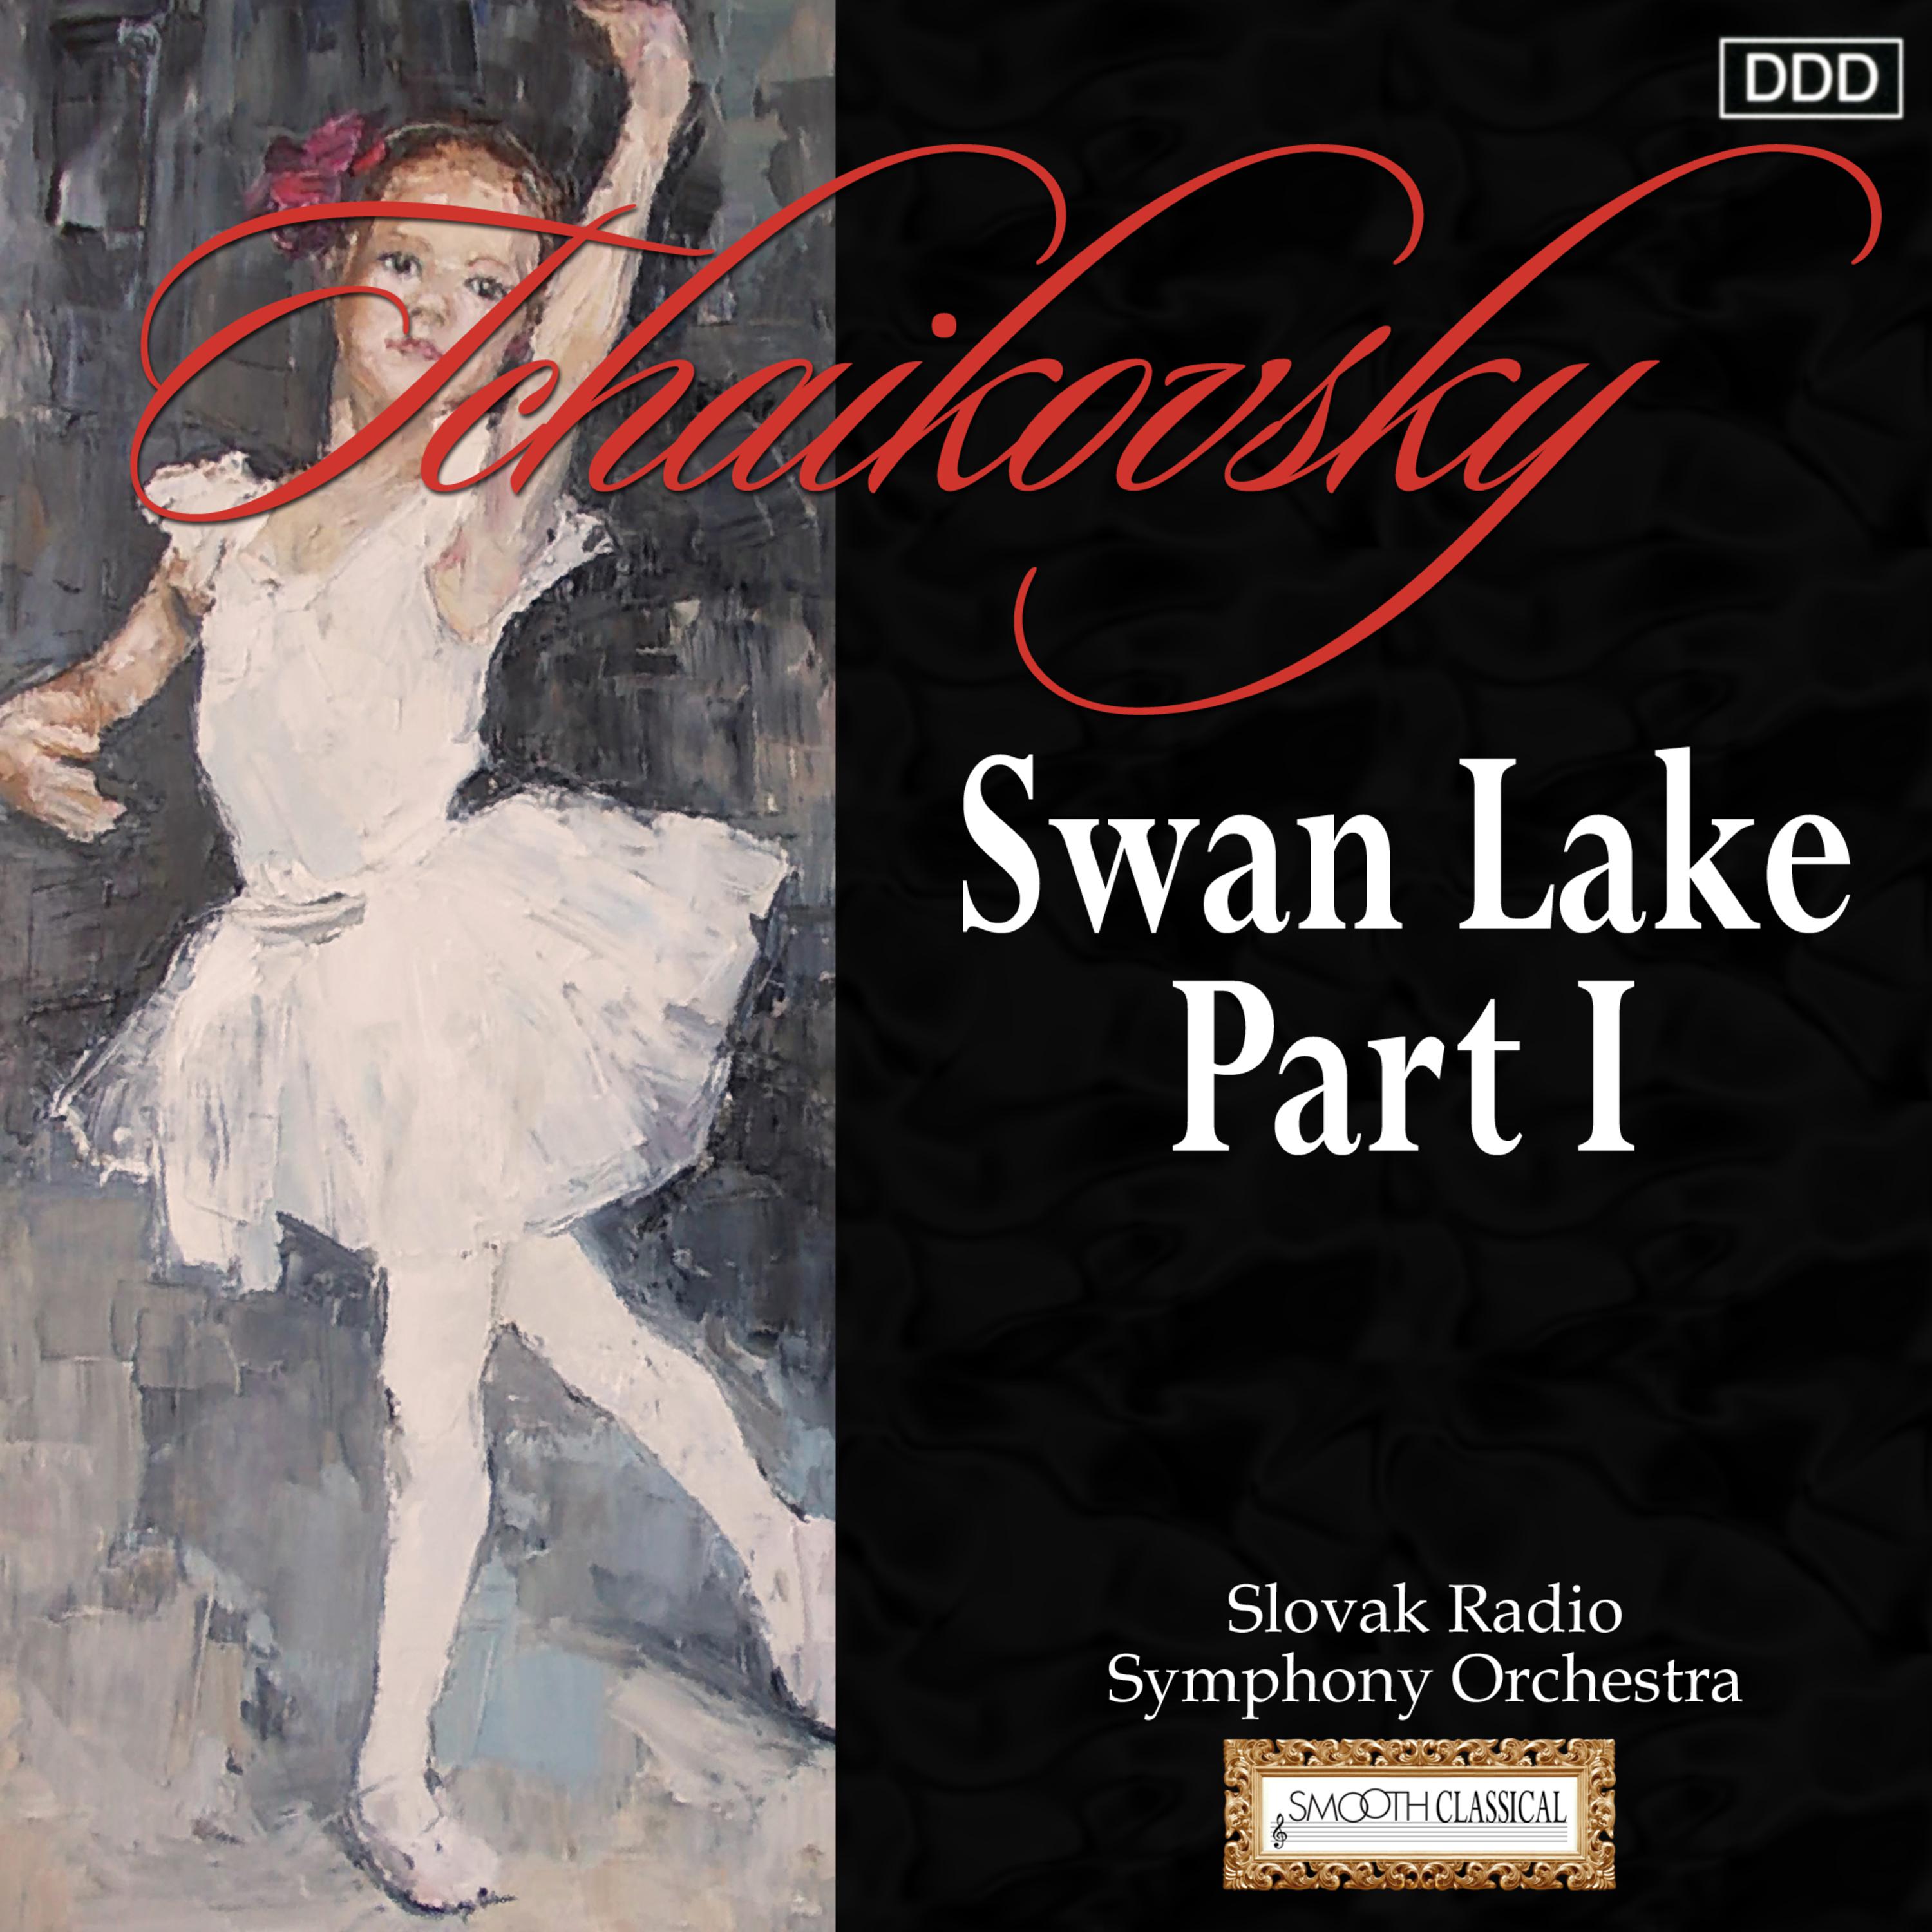 Swan Lake, Op. 20a, Act II: By a Lake: Dance of the swans: I. Tempo di valse - II. Solo of Odette - III. Dance of the Swans - IV. Allegro moderato - V. Pas d'action - VI. Dance of the Ensemble - VII. Coda